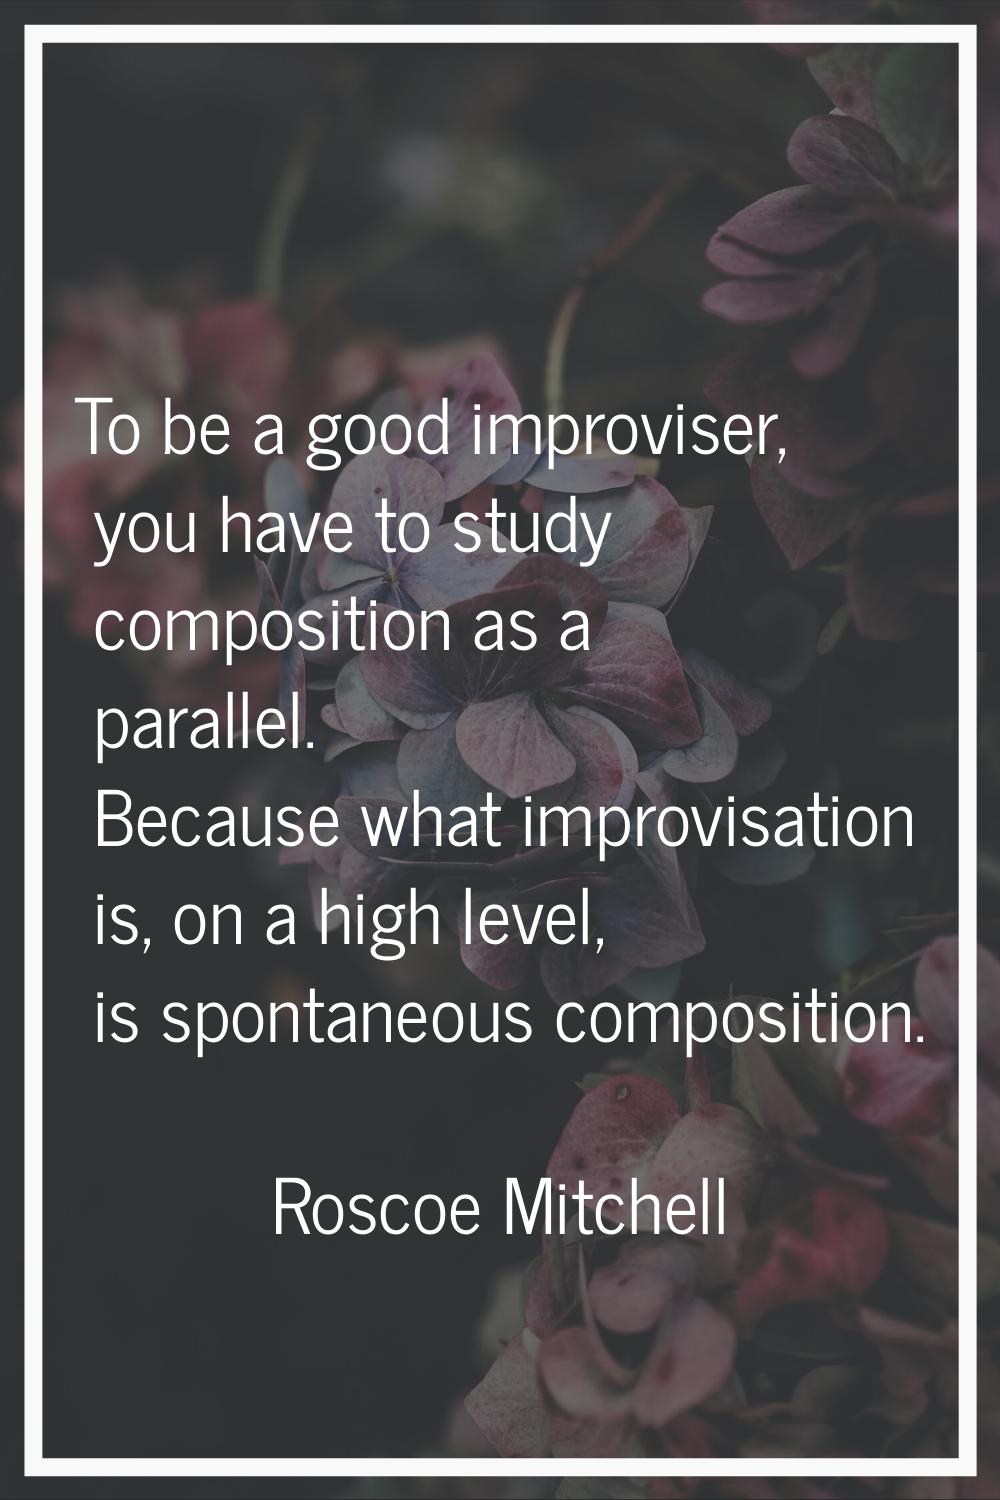 To be a good improviser, you have to study composition as a parallel. Because what improvisation is